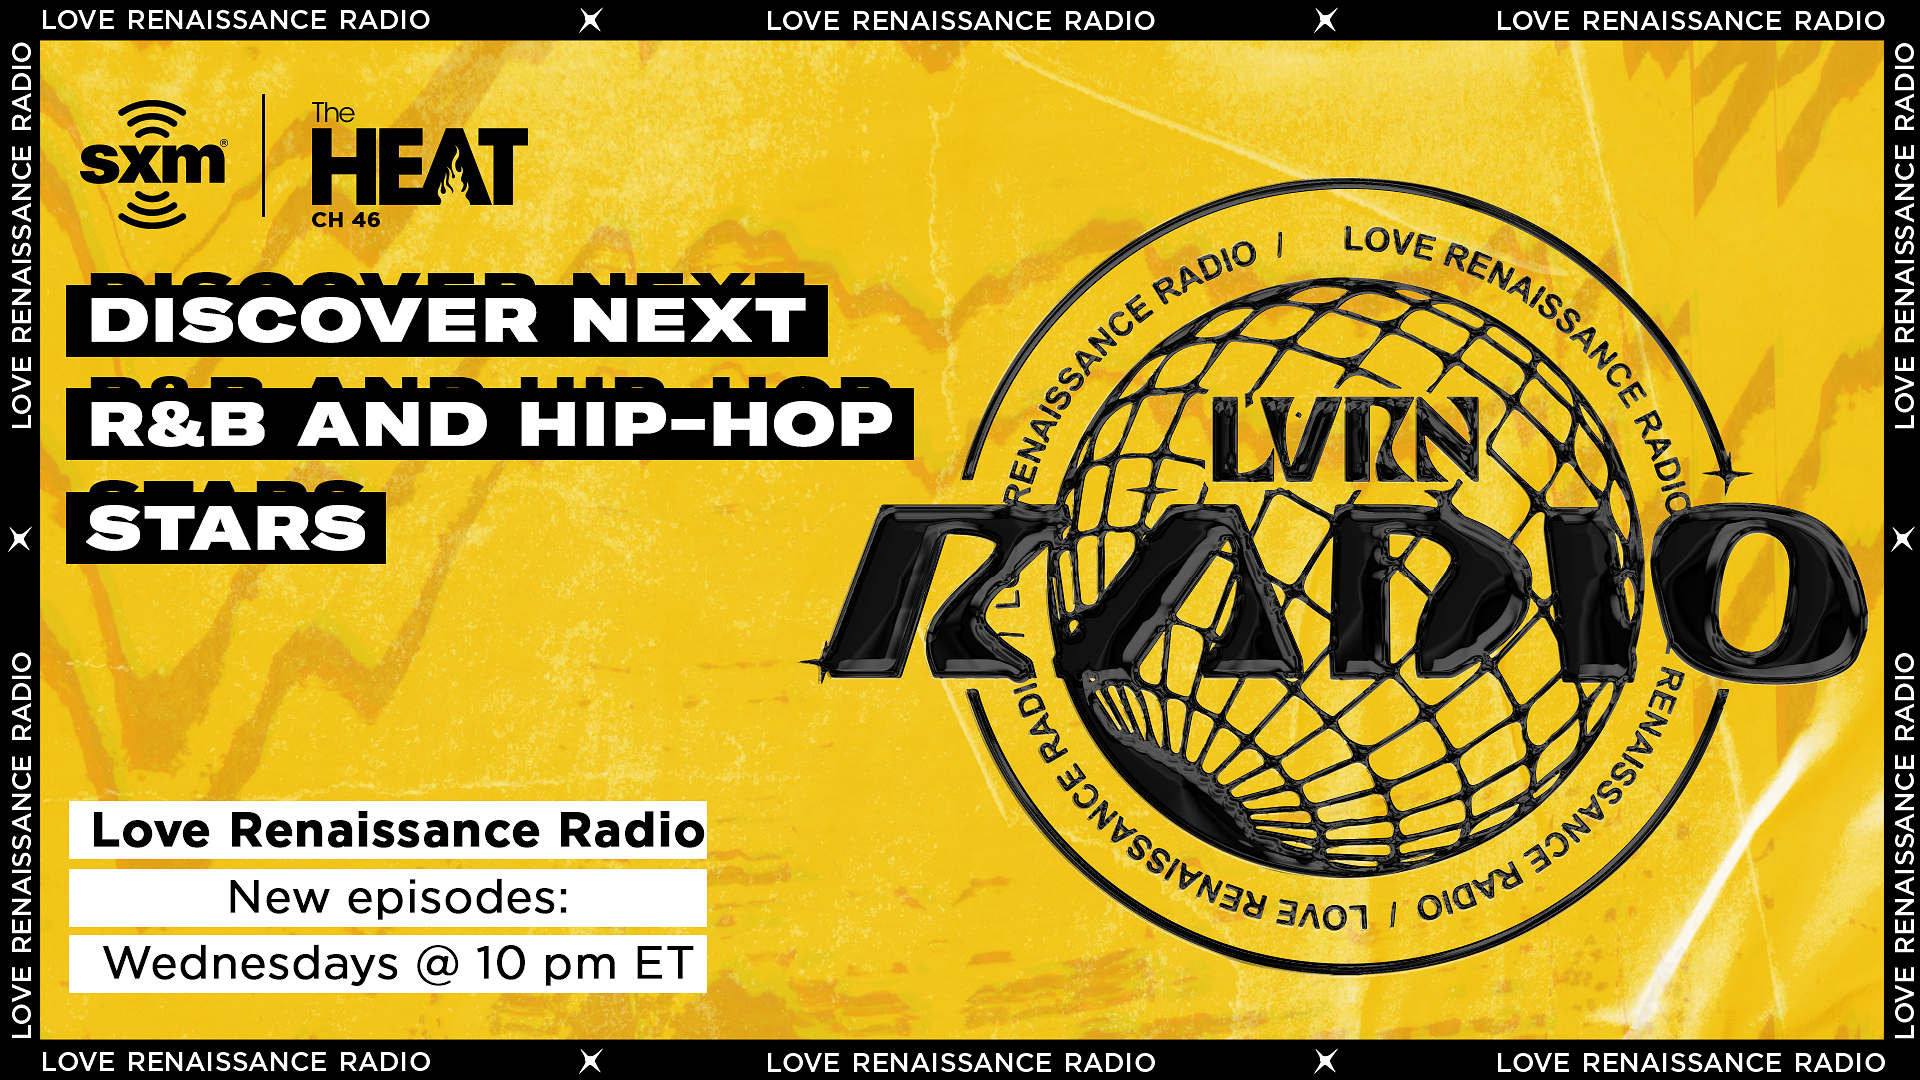 Love Renaissance Radio Launches Exclusively On SiriusXM’s The Heat Today